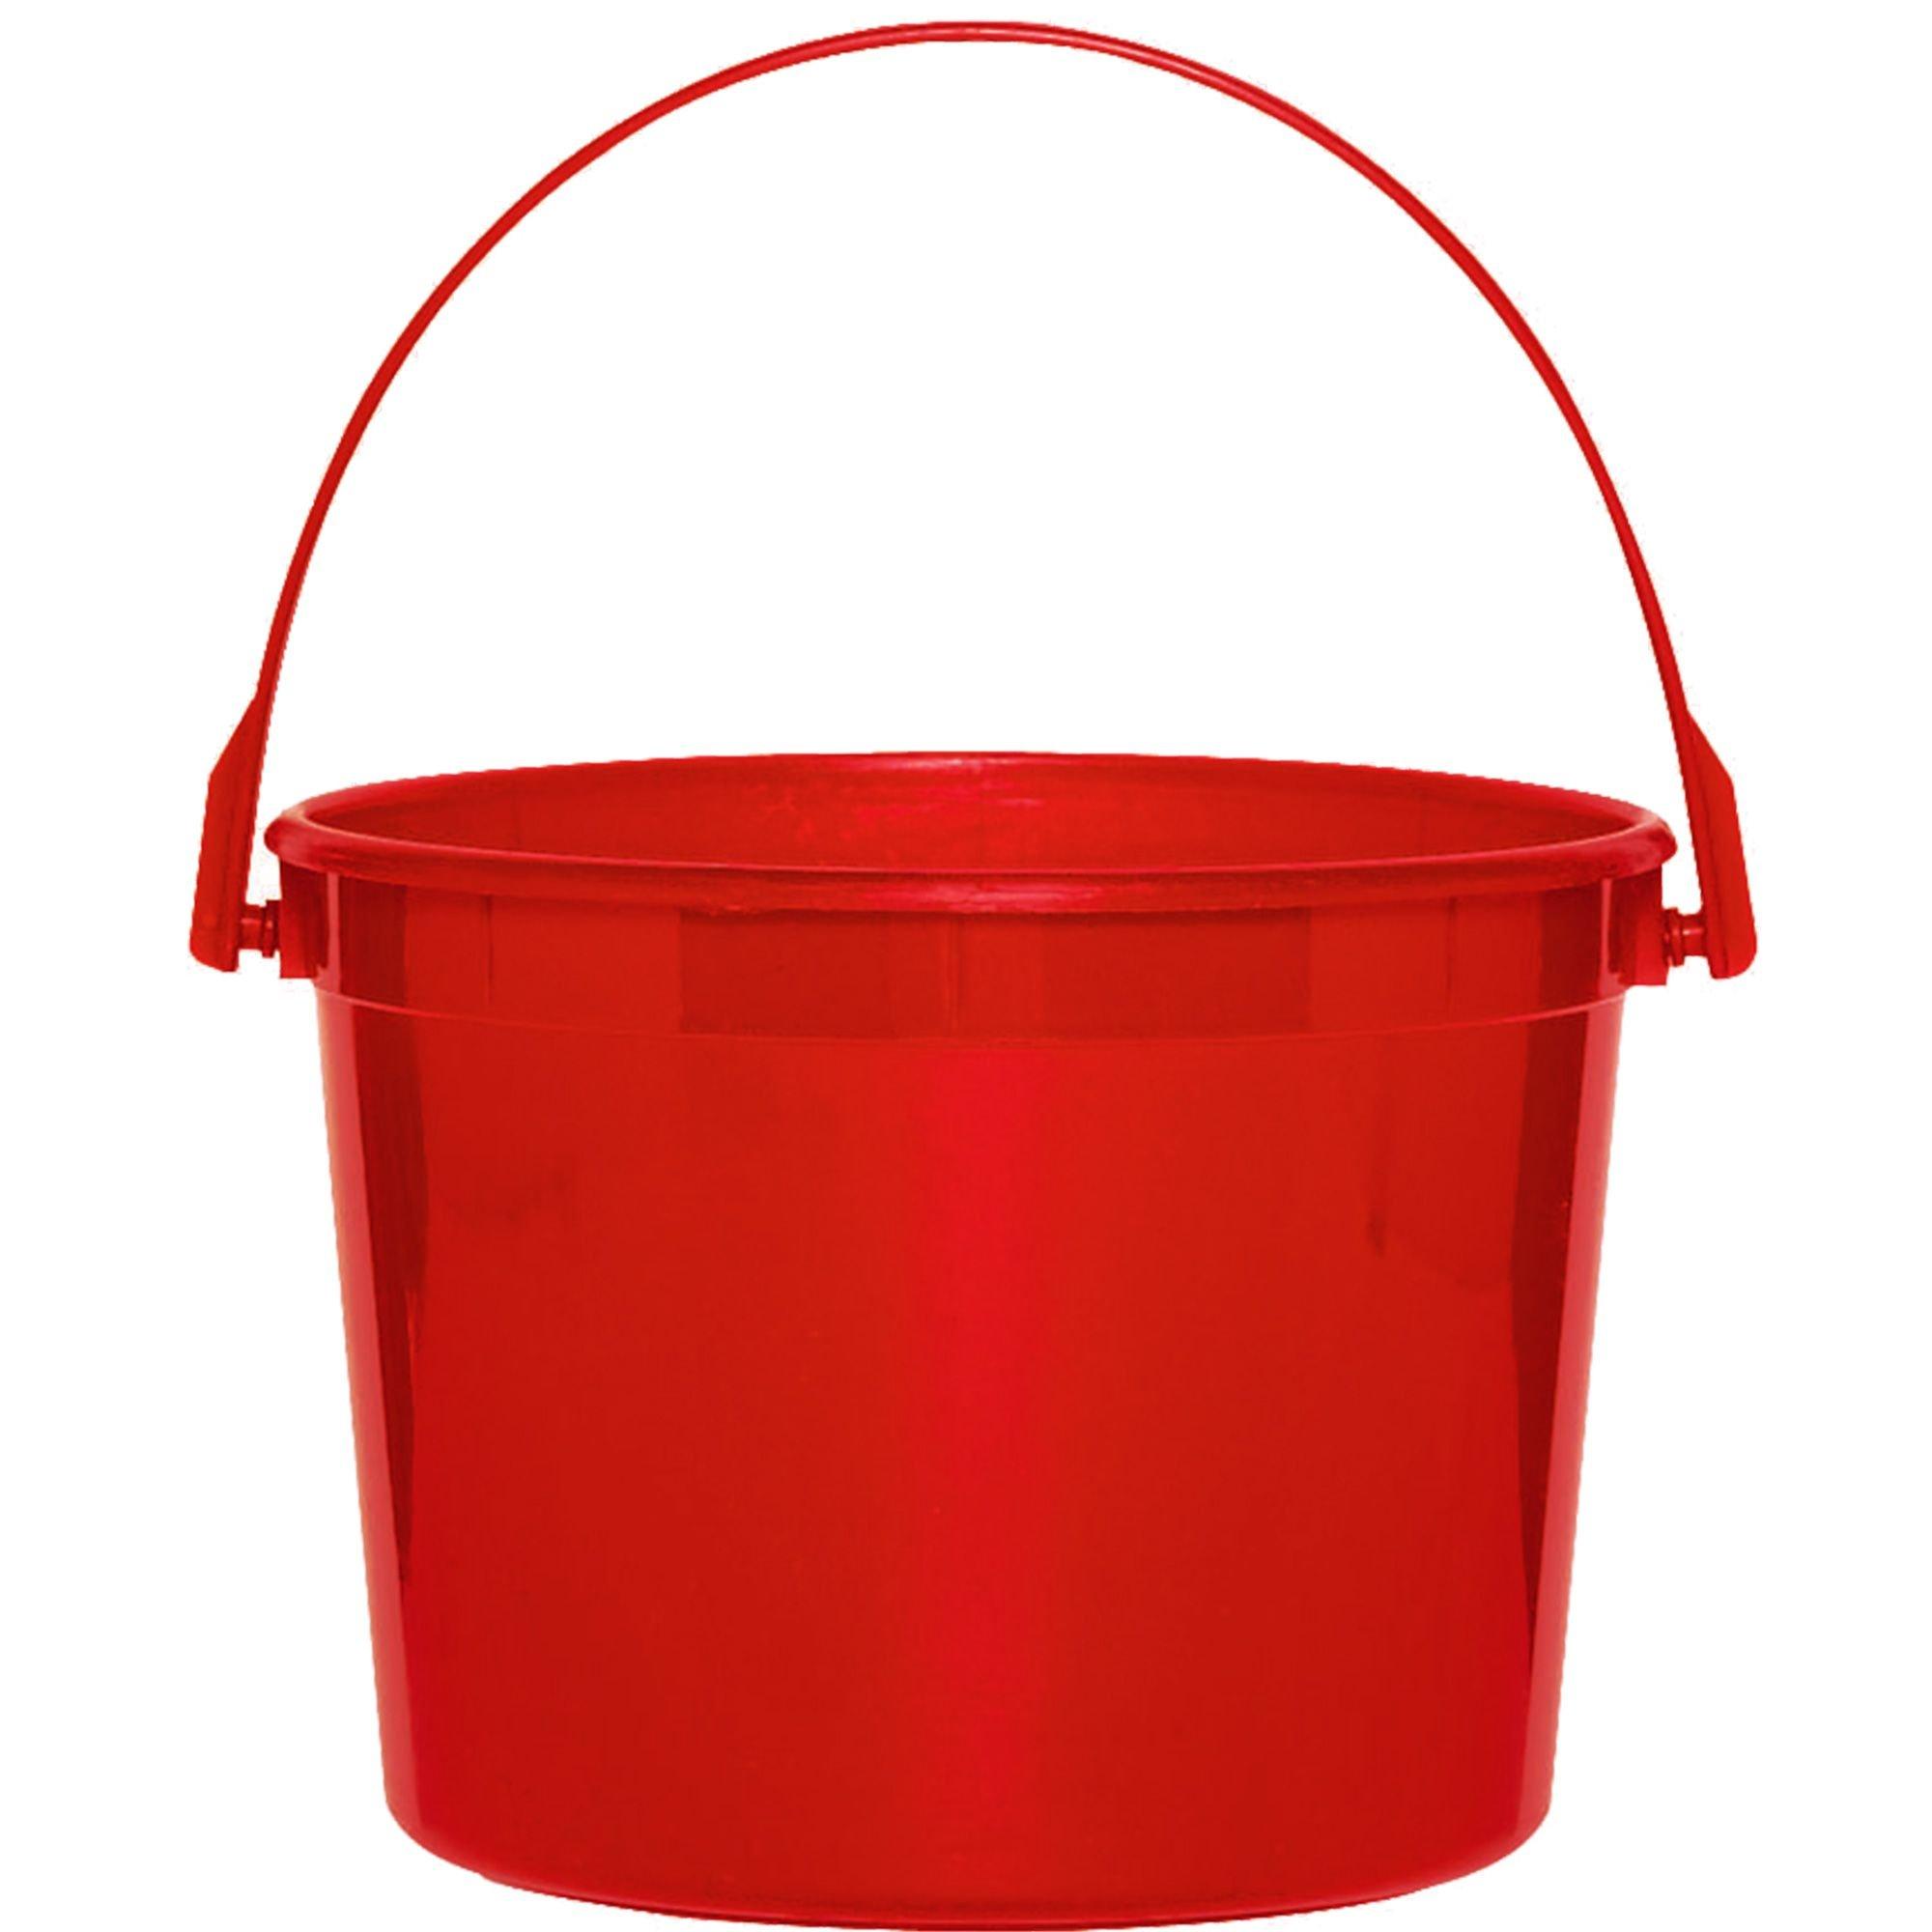 Paint Bucket Favor Containers - 6 Pc.